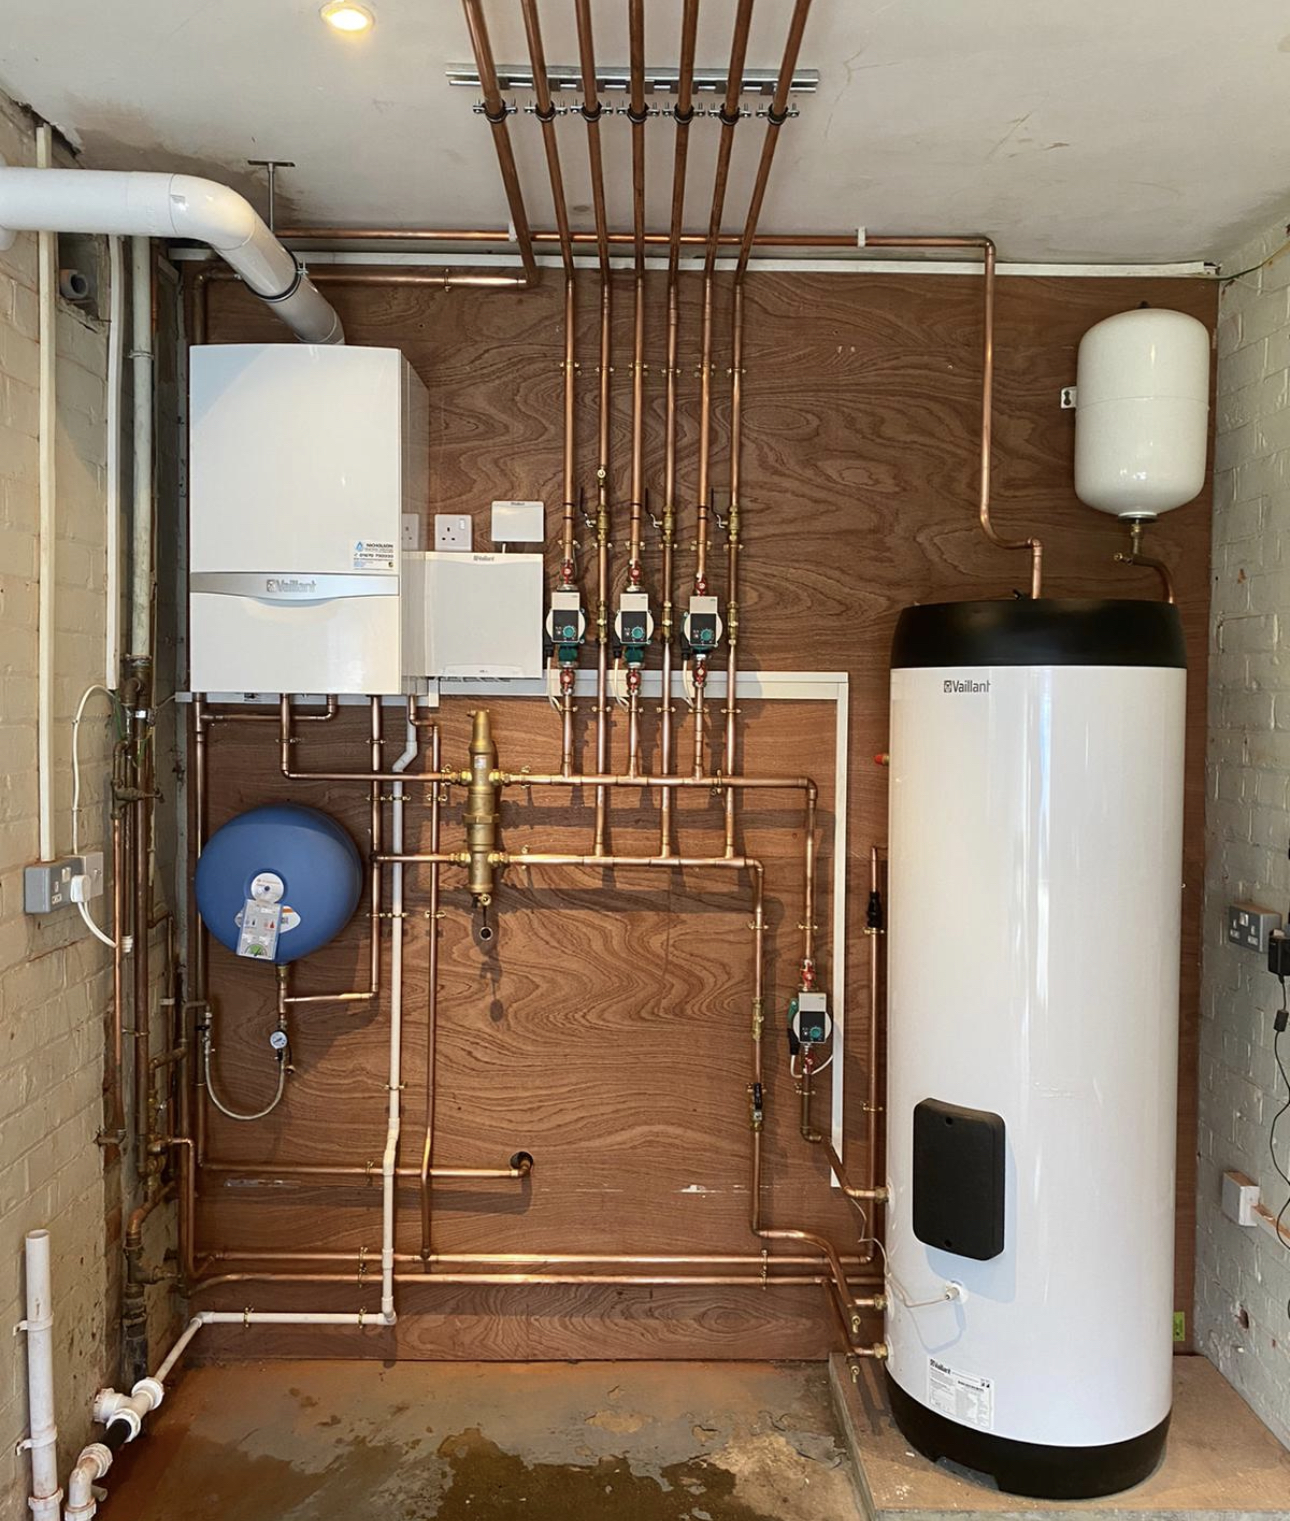 A new vaillant boiler system 